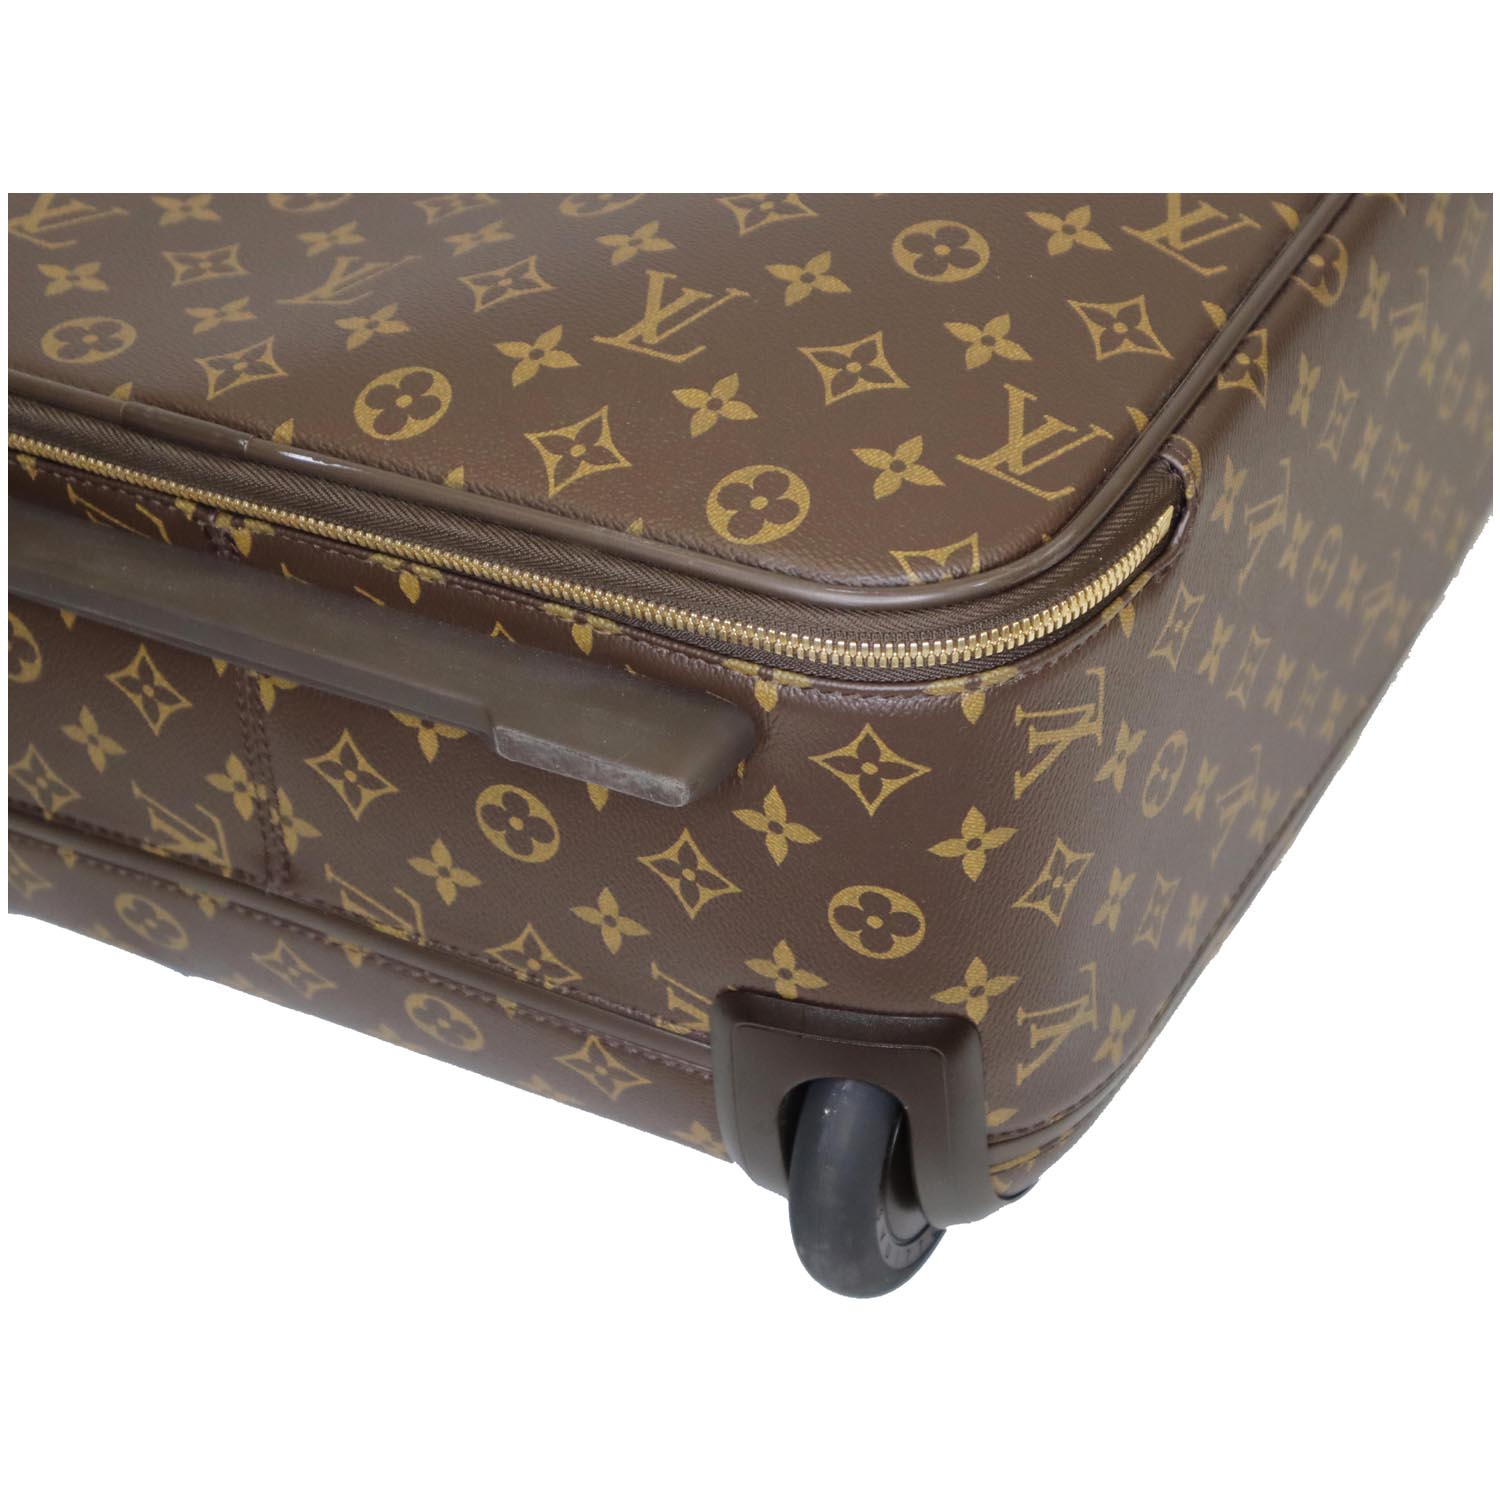 Sold at Auction: A Louis Vuitton Pegase 50 Canvas Cabin/Travel Case. The  chocolate brown canvas material with monogra